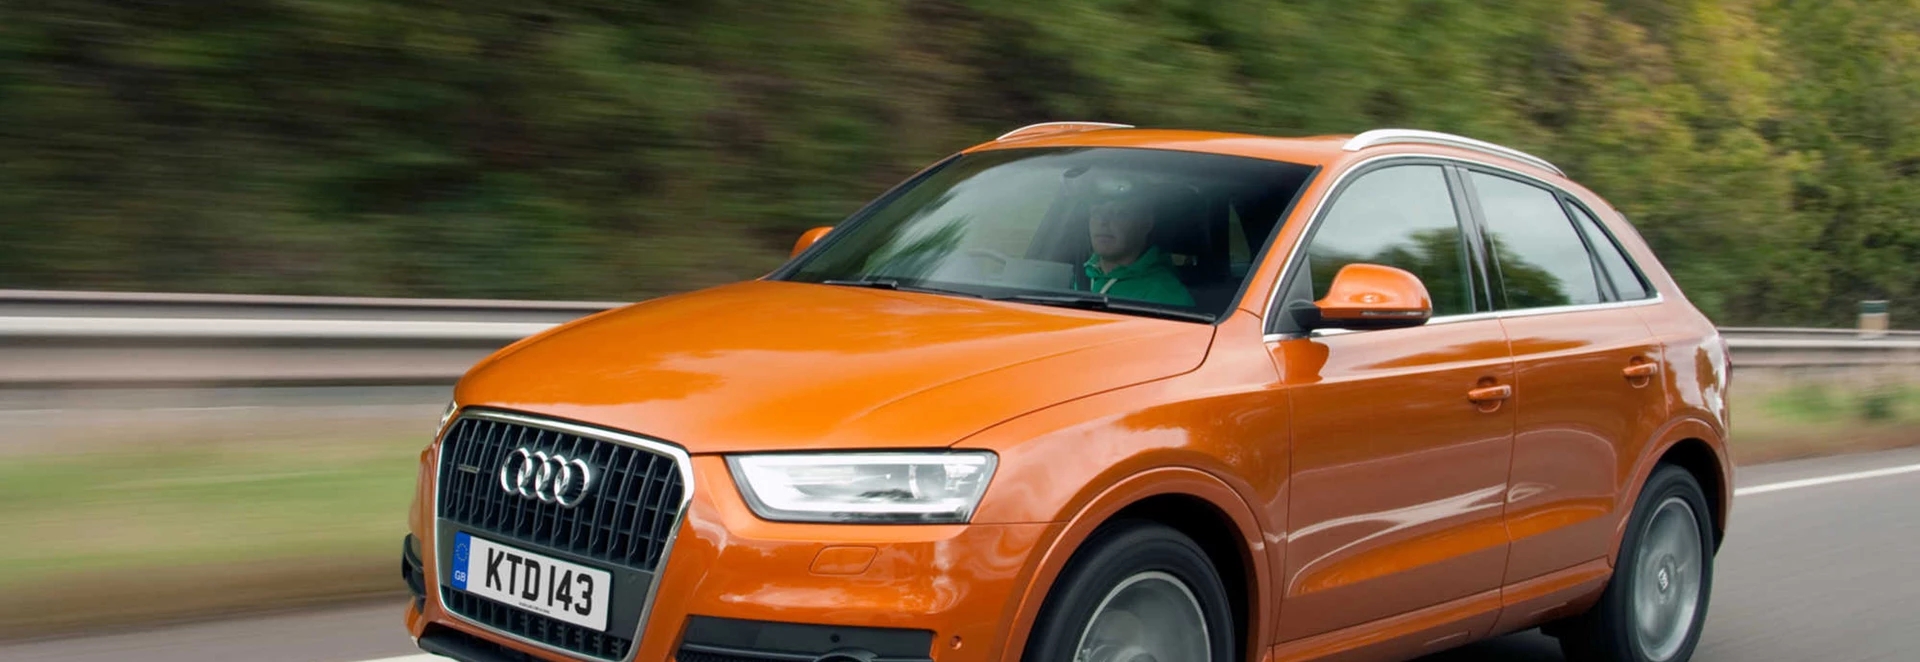 Audi Q3 crossover review 